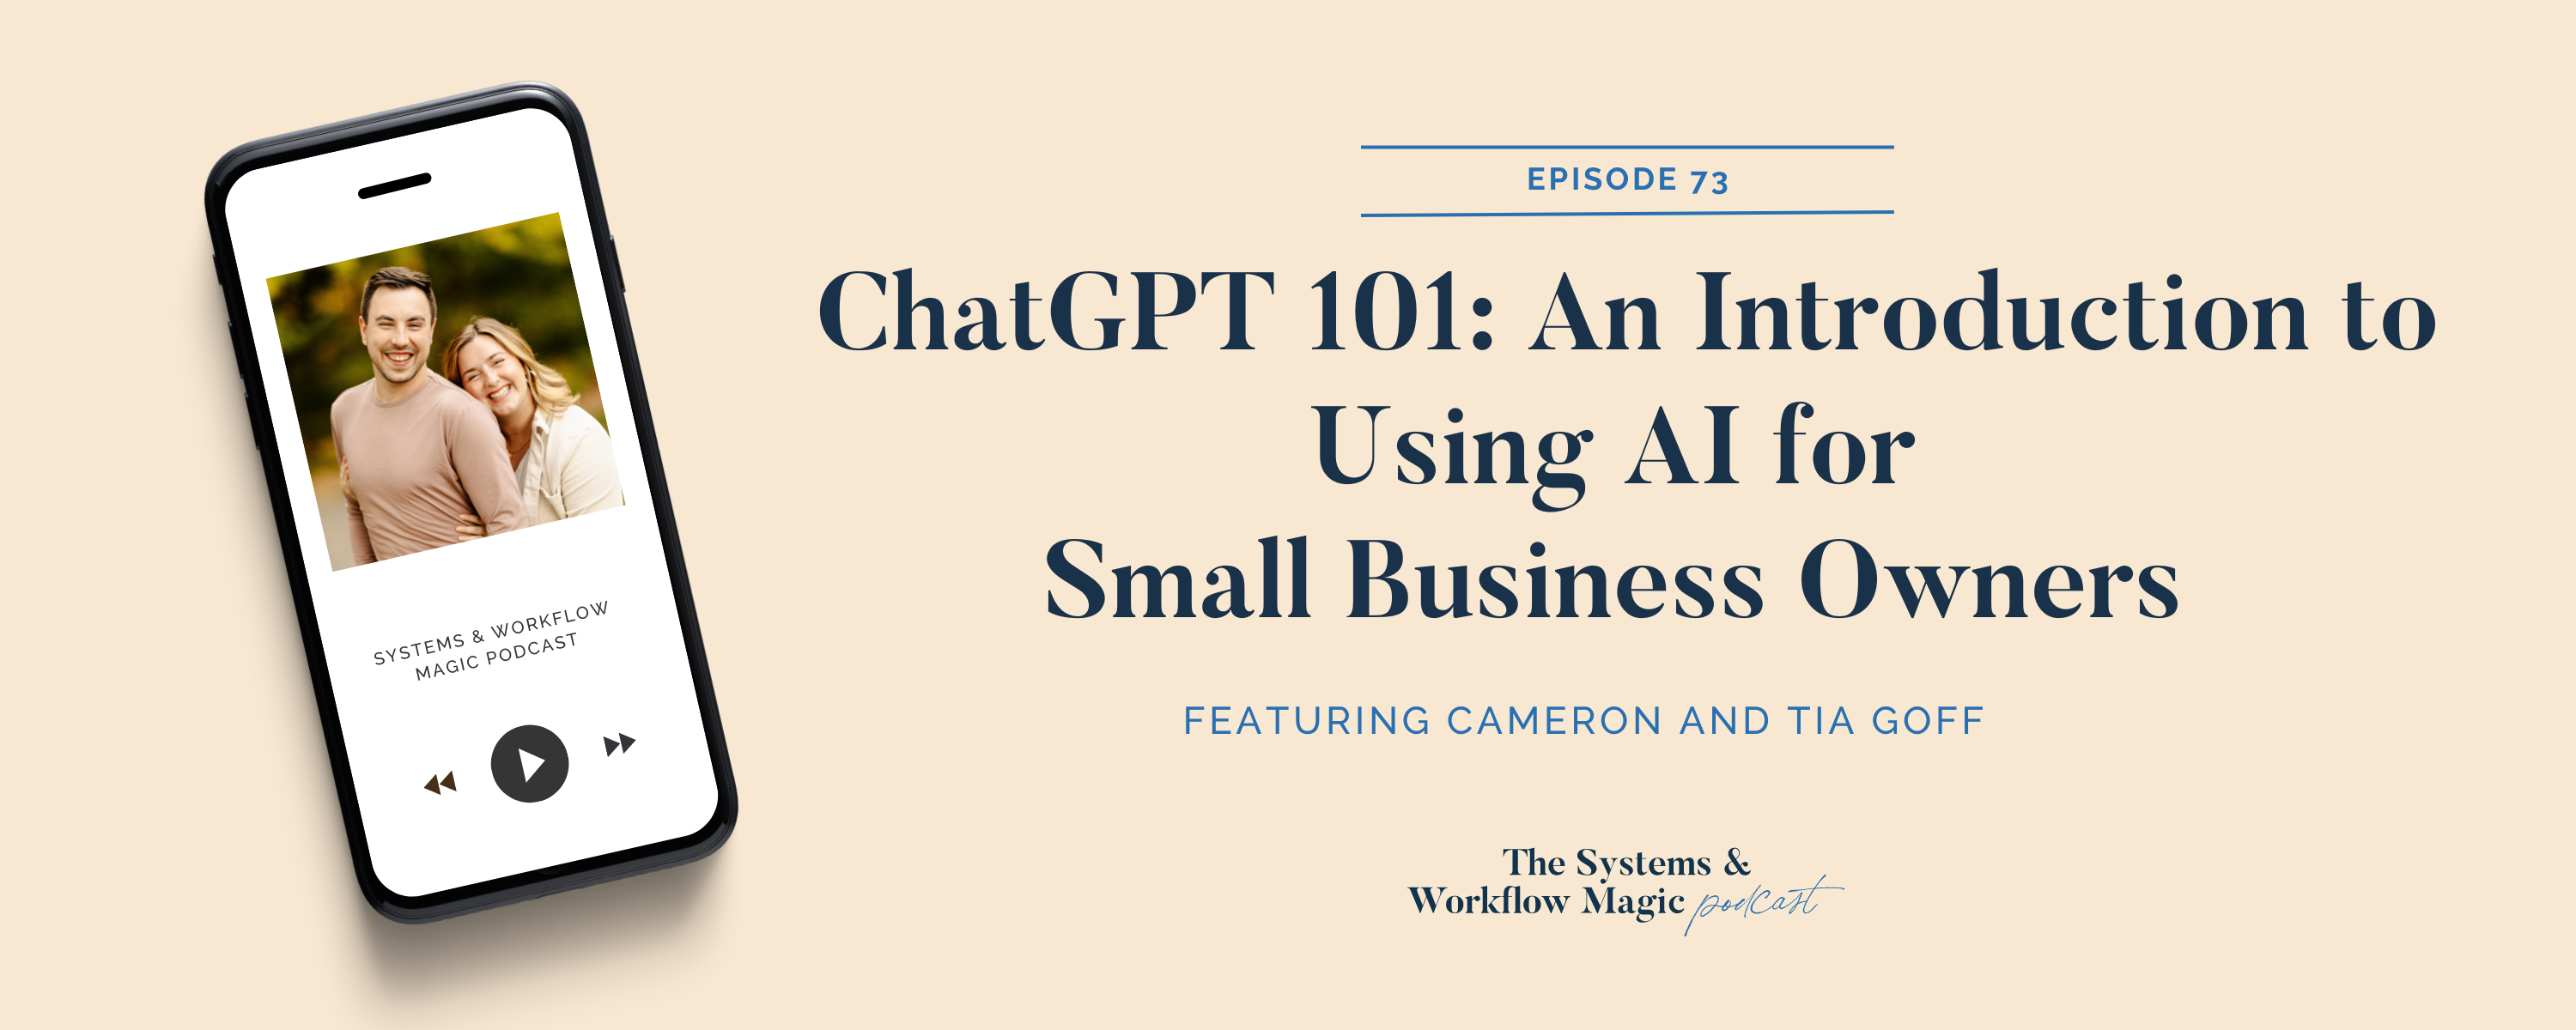 ChatGPT-101-An-Introduction-to-Using-AI-for-Small-Business-Owners-featuring-Cameron-&-Tia-Goff